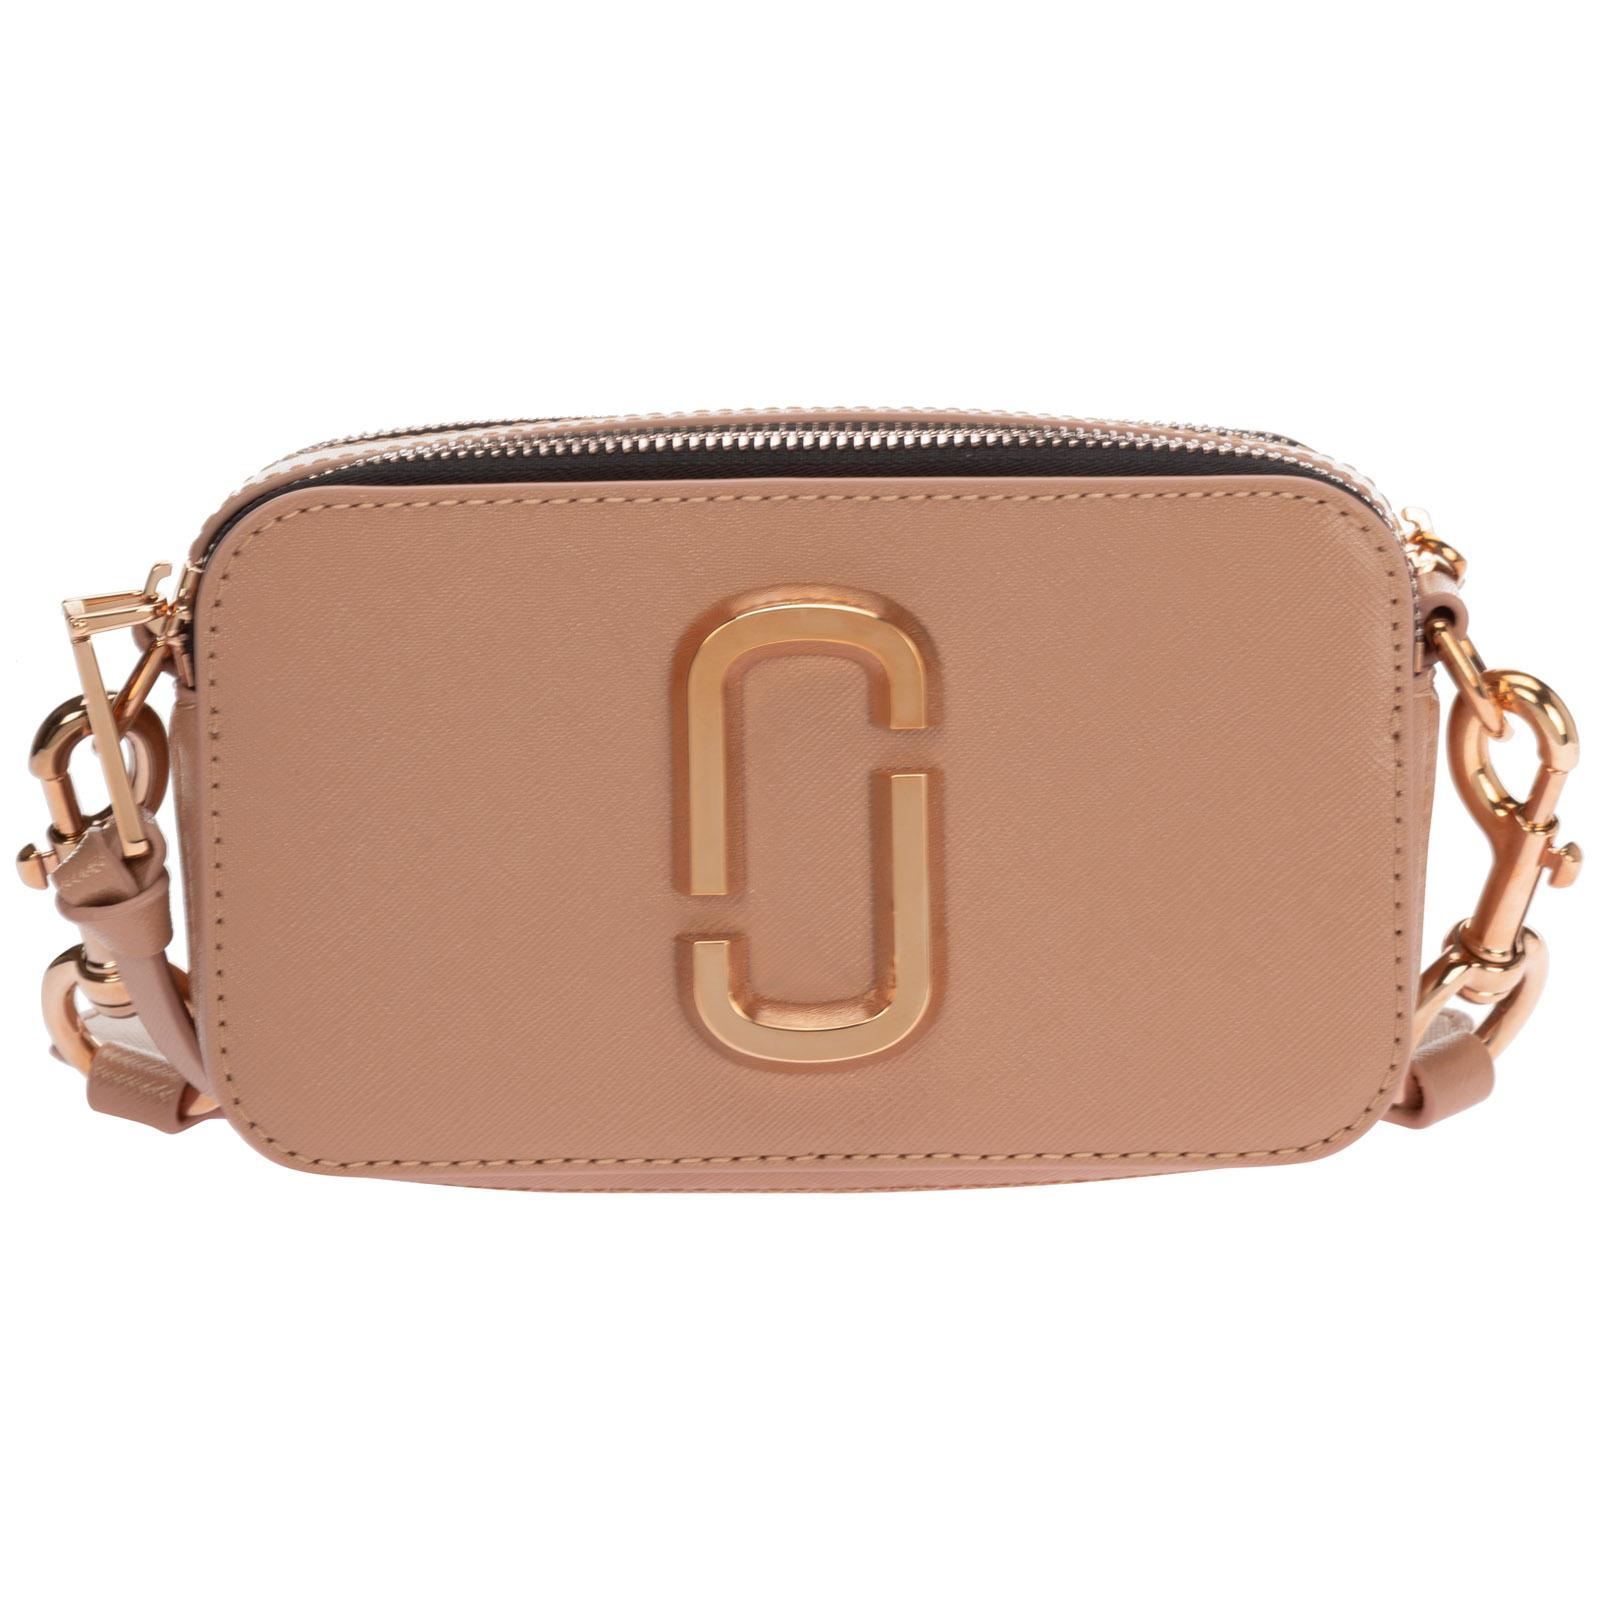 Marc Jacobs THE Snapshot DTM Small Camera Bag Crossbody in Sunkissed – The  Bag Shop NZ